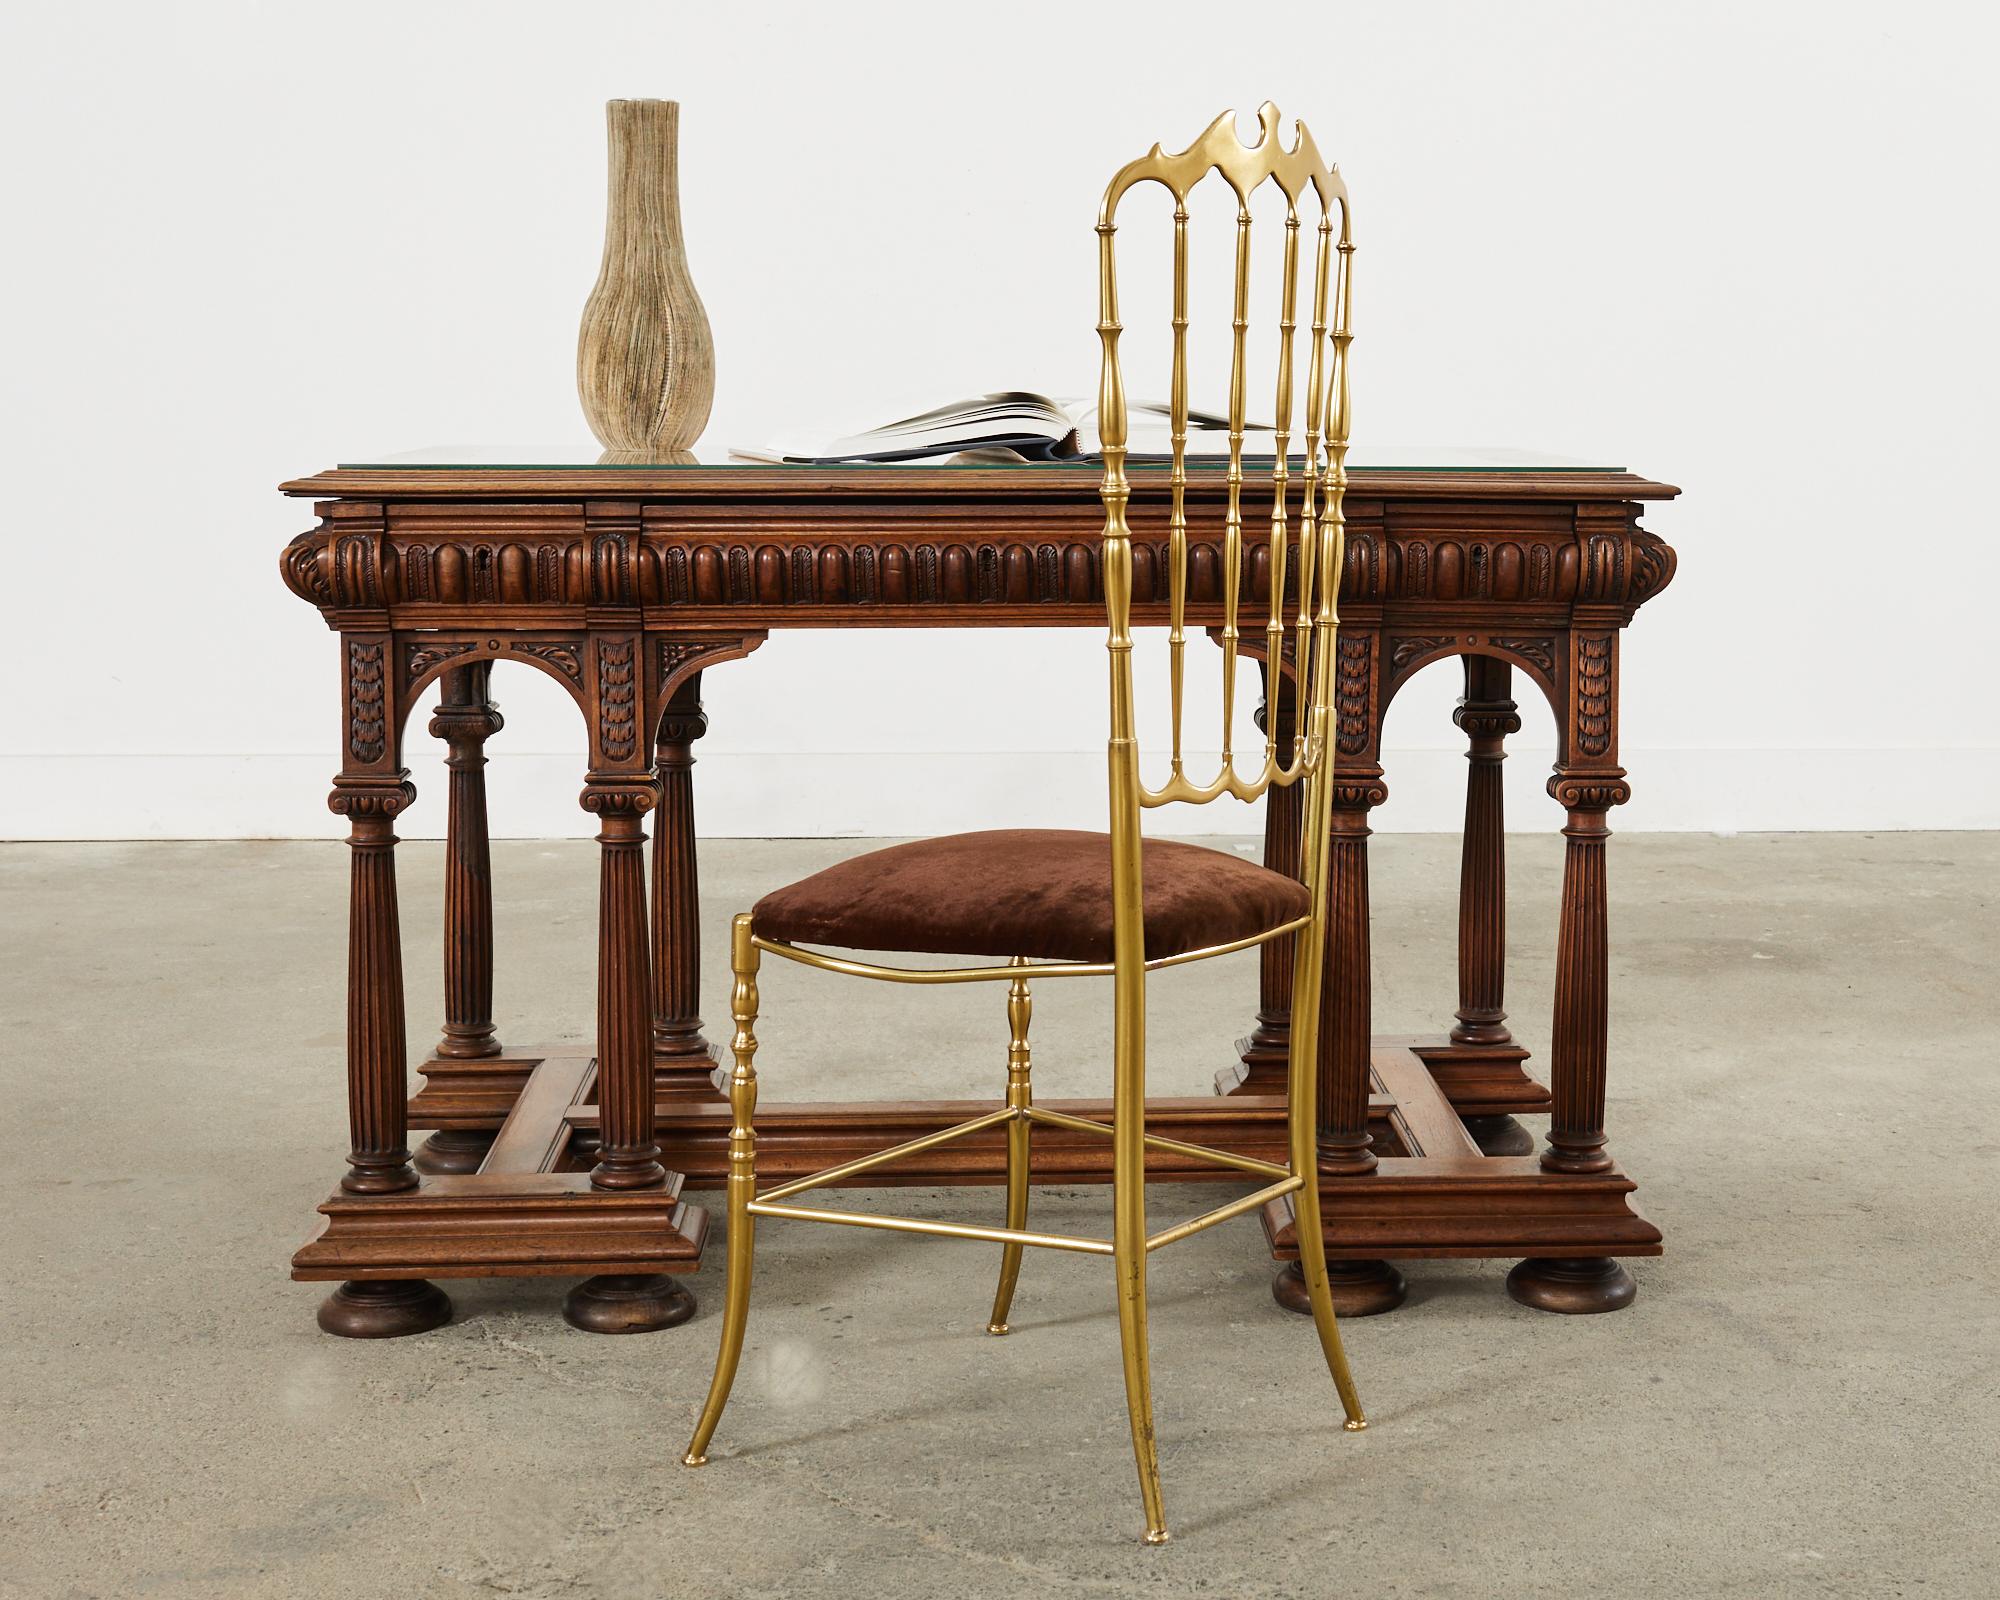 Dramatic 19th century English library table, writing table, or desk hand-crafted from oak. The table features a trestle style base with Greco-Roman corinthian columns in the neoclassical taste. The columns are supported by an H shaped stretcher